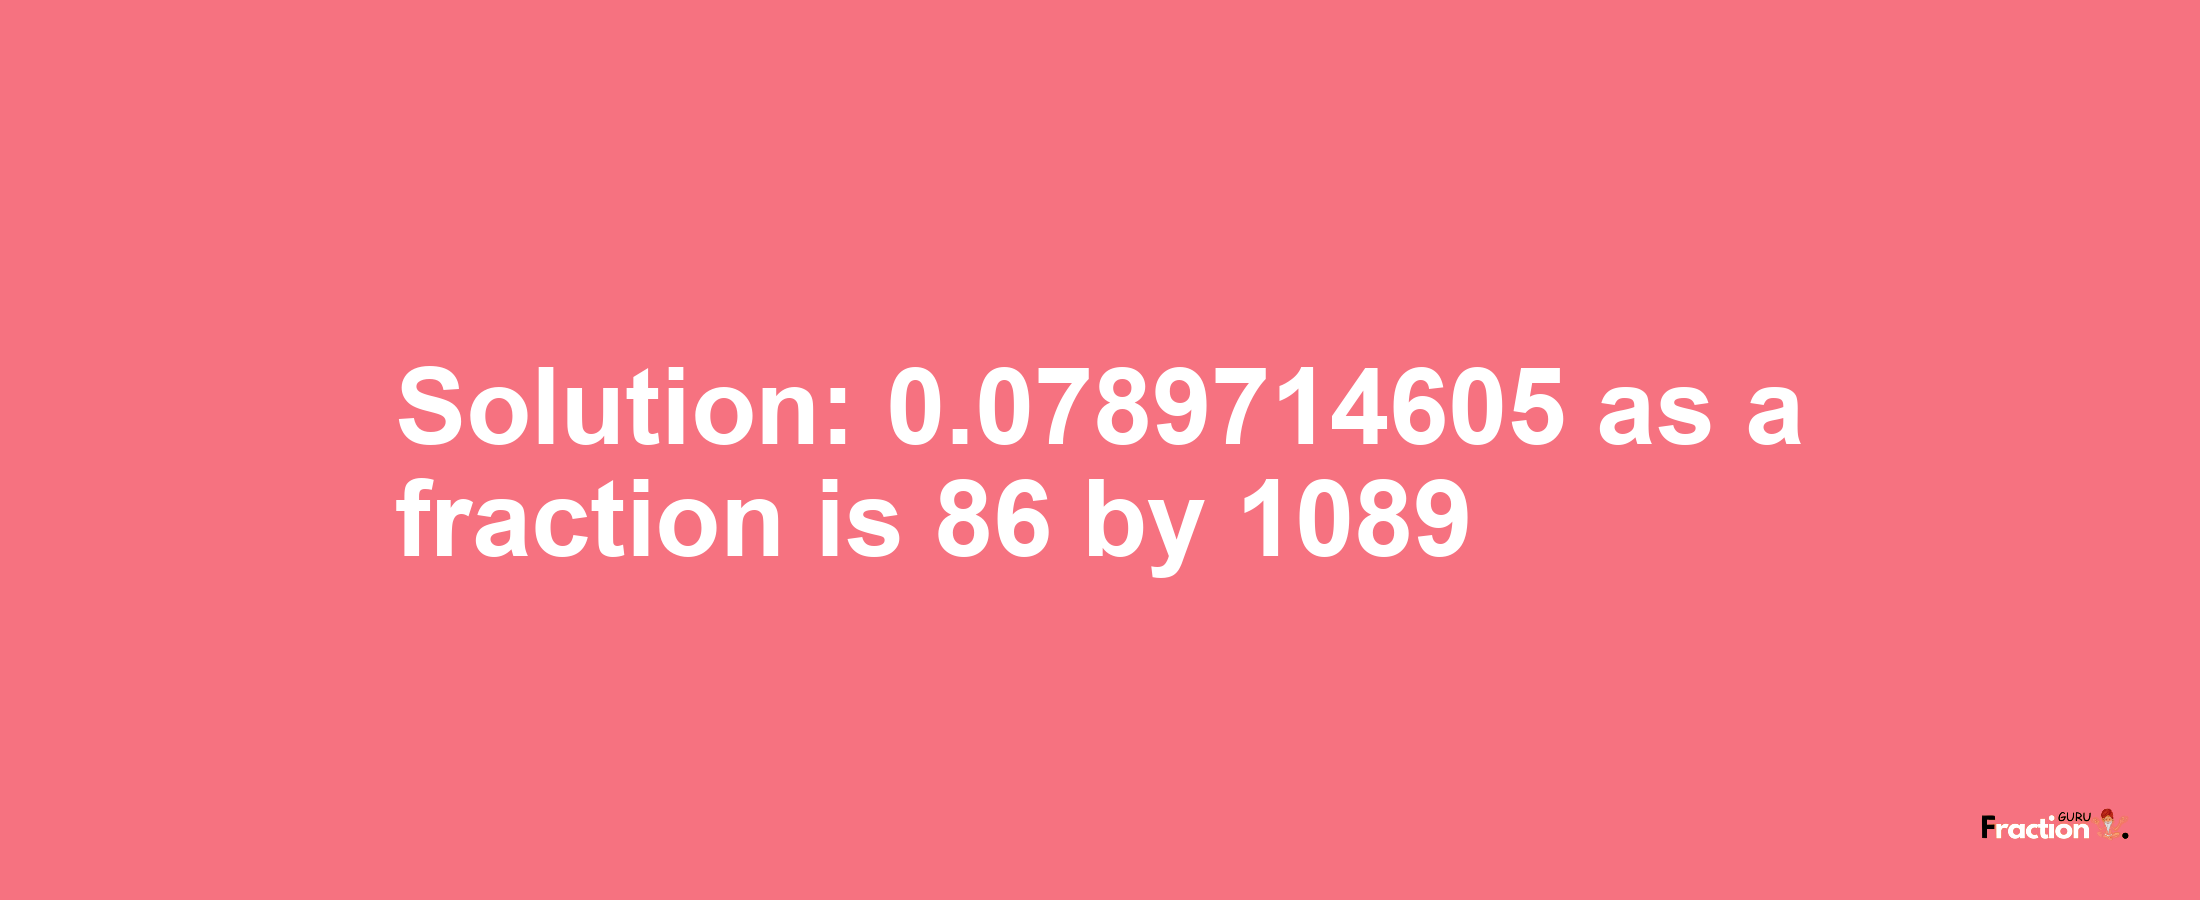 Solution:0.0789714605 as a fraction is 86/1089